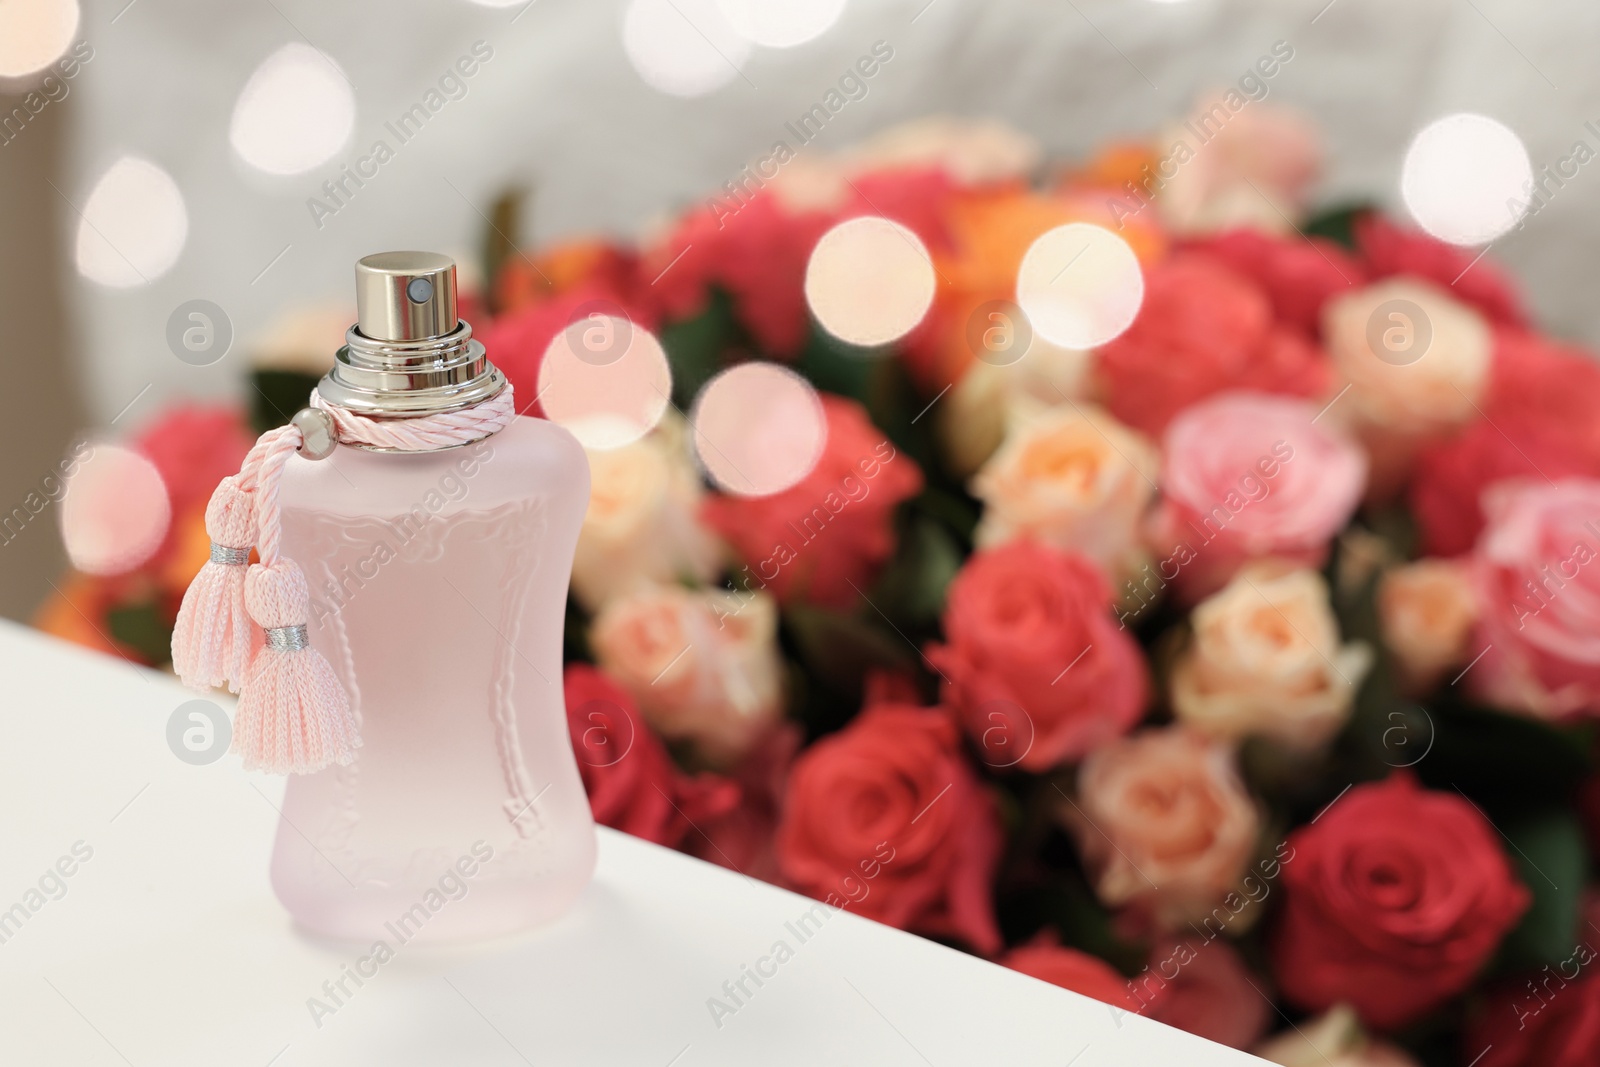 Photo of Bottle of perfume on white table against bouquet of beautiful roses. Space for text